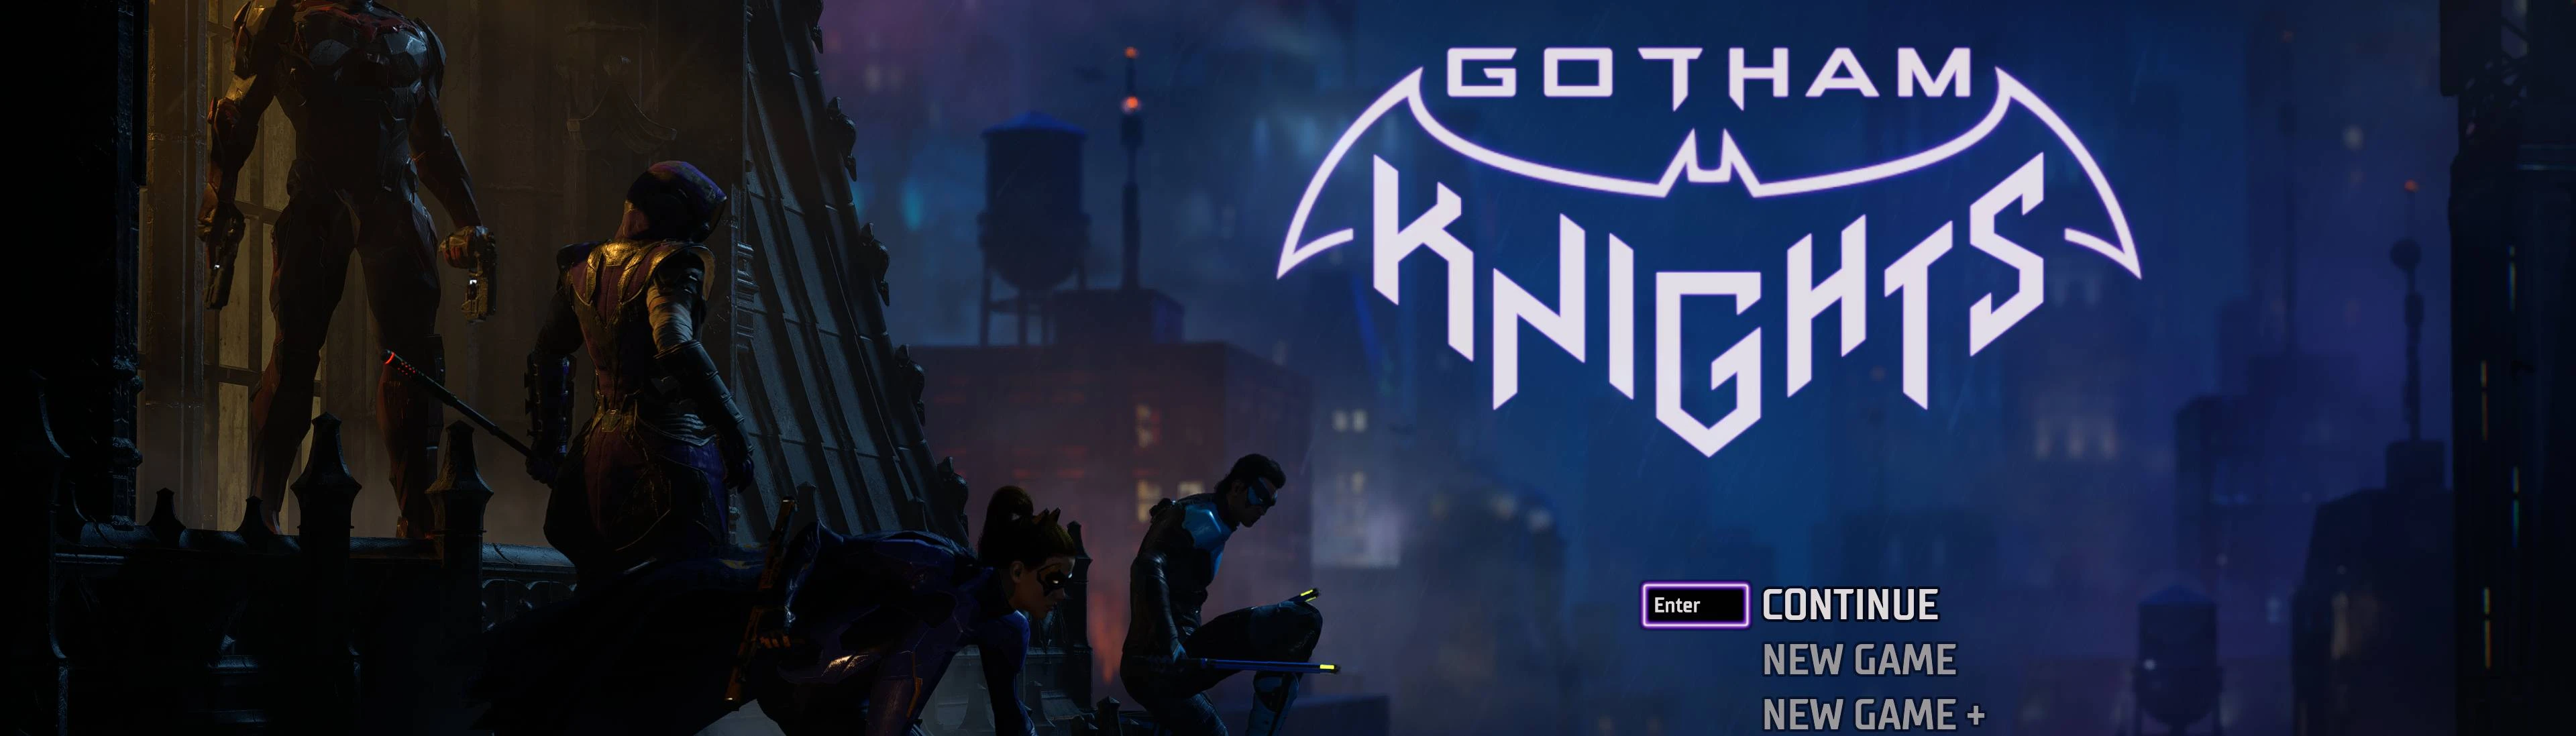 Gotham Knights Walkthrough, Guide, Gameplay, Wiki, and More - News